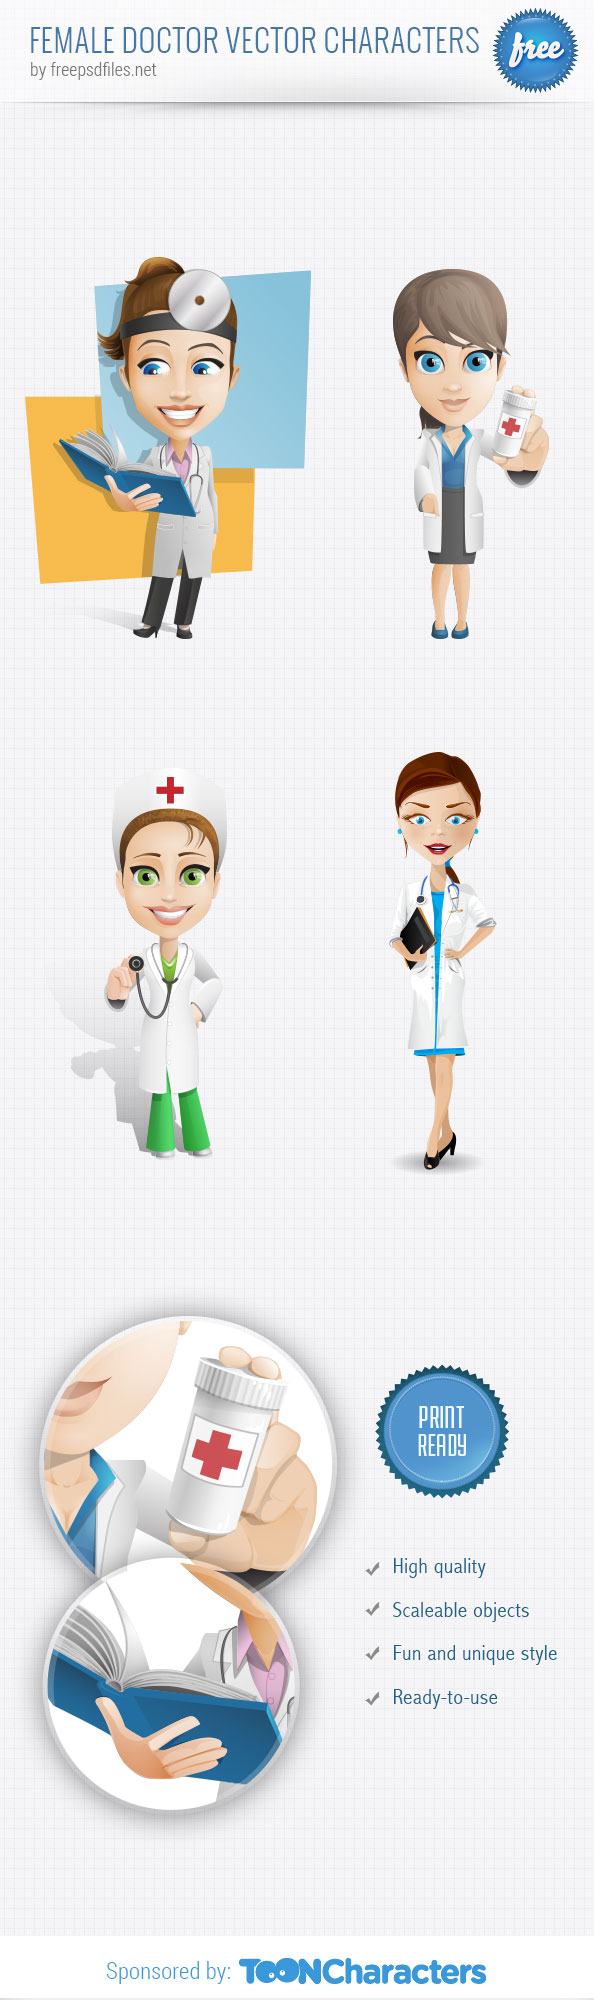 Female Doctor Vector Character Set